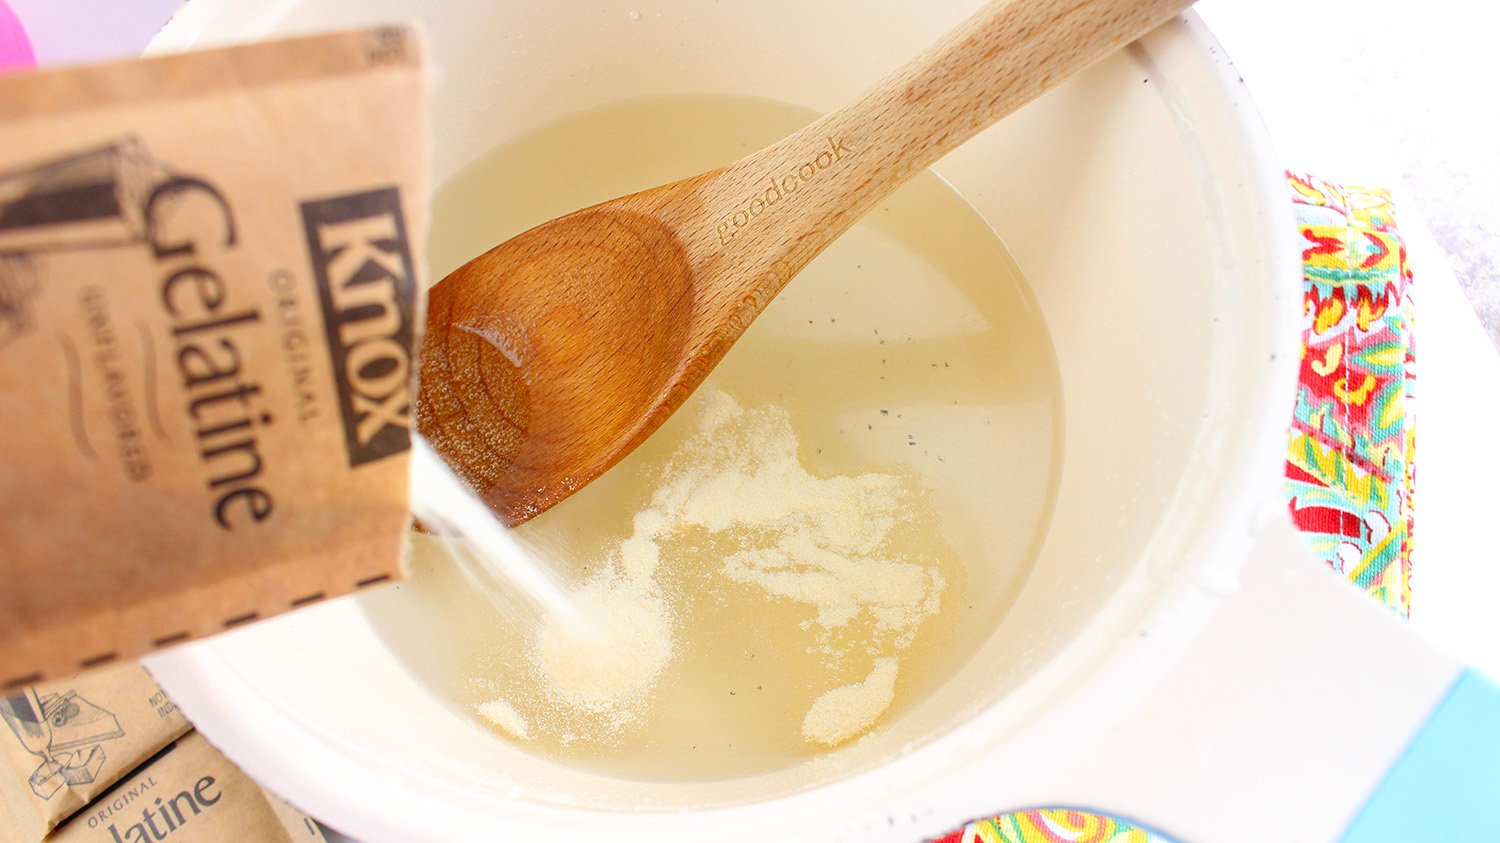 mixing ingredients for jello shots in mixing bowl with wooden spoon